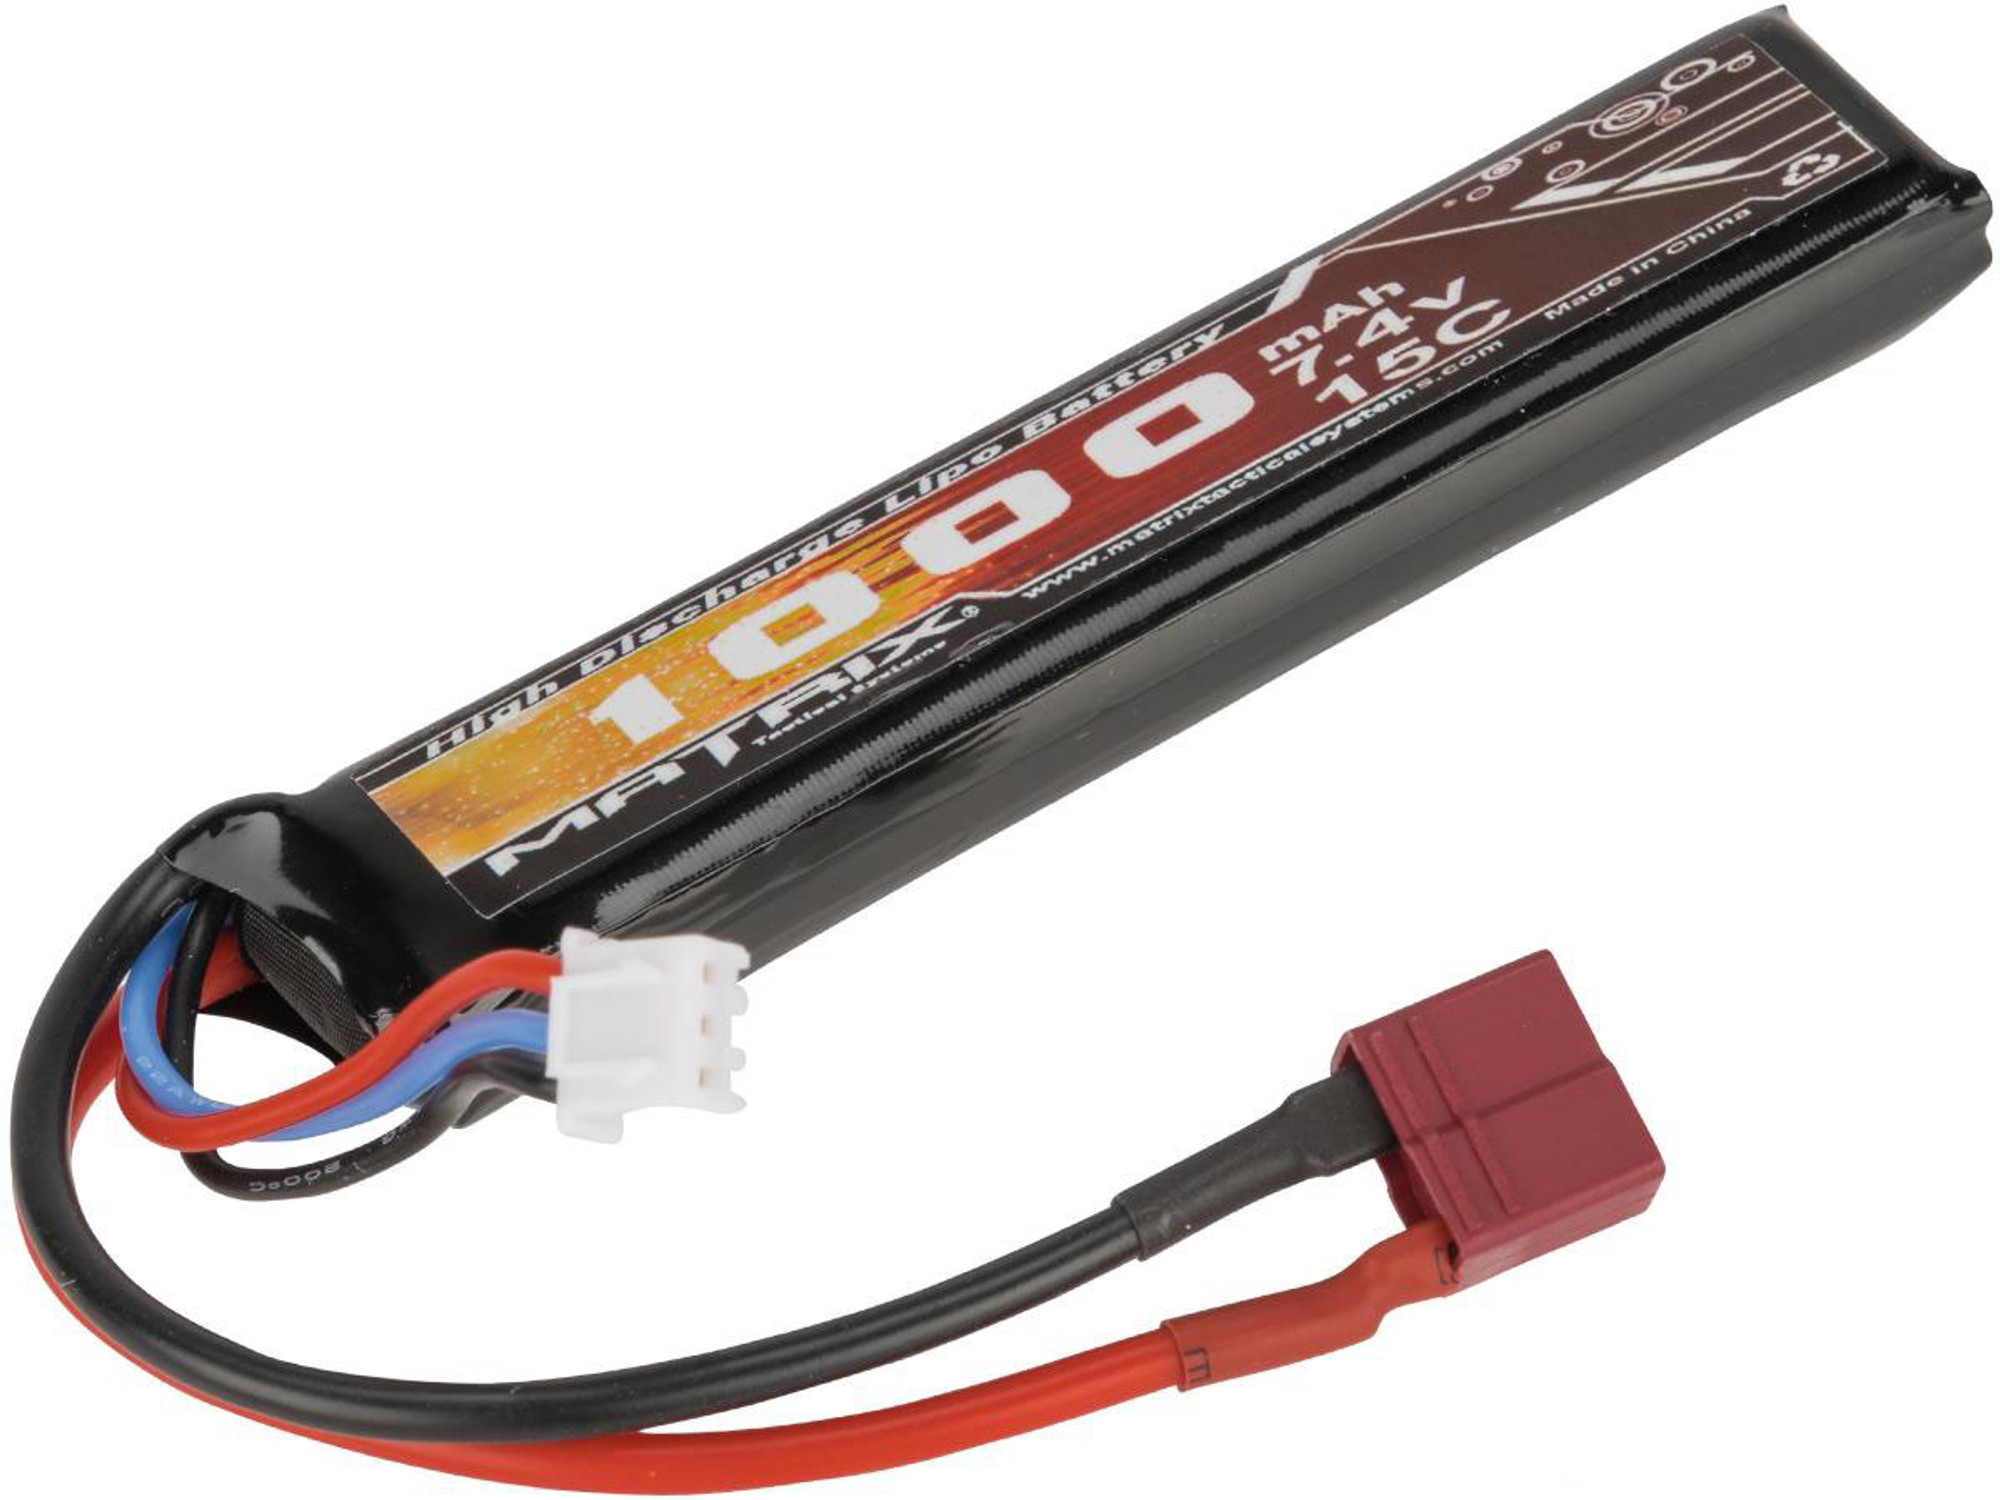 Matrix High Performance 7.4V Stick Type Airsoft LiPo Battery (Configuration: 1000mAh / 15C / Deans & Long Wire)